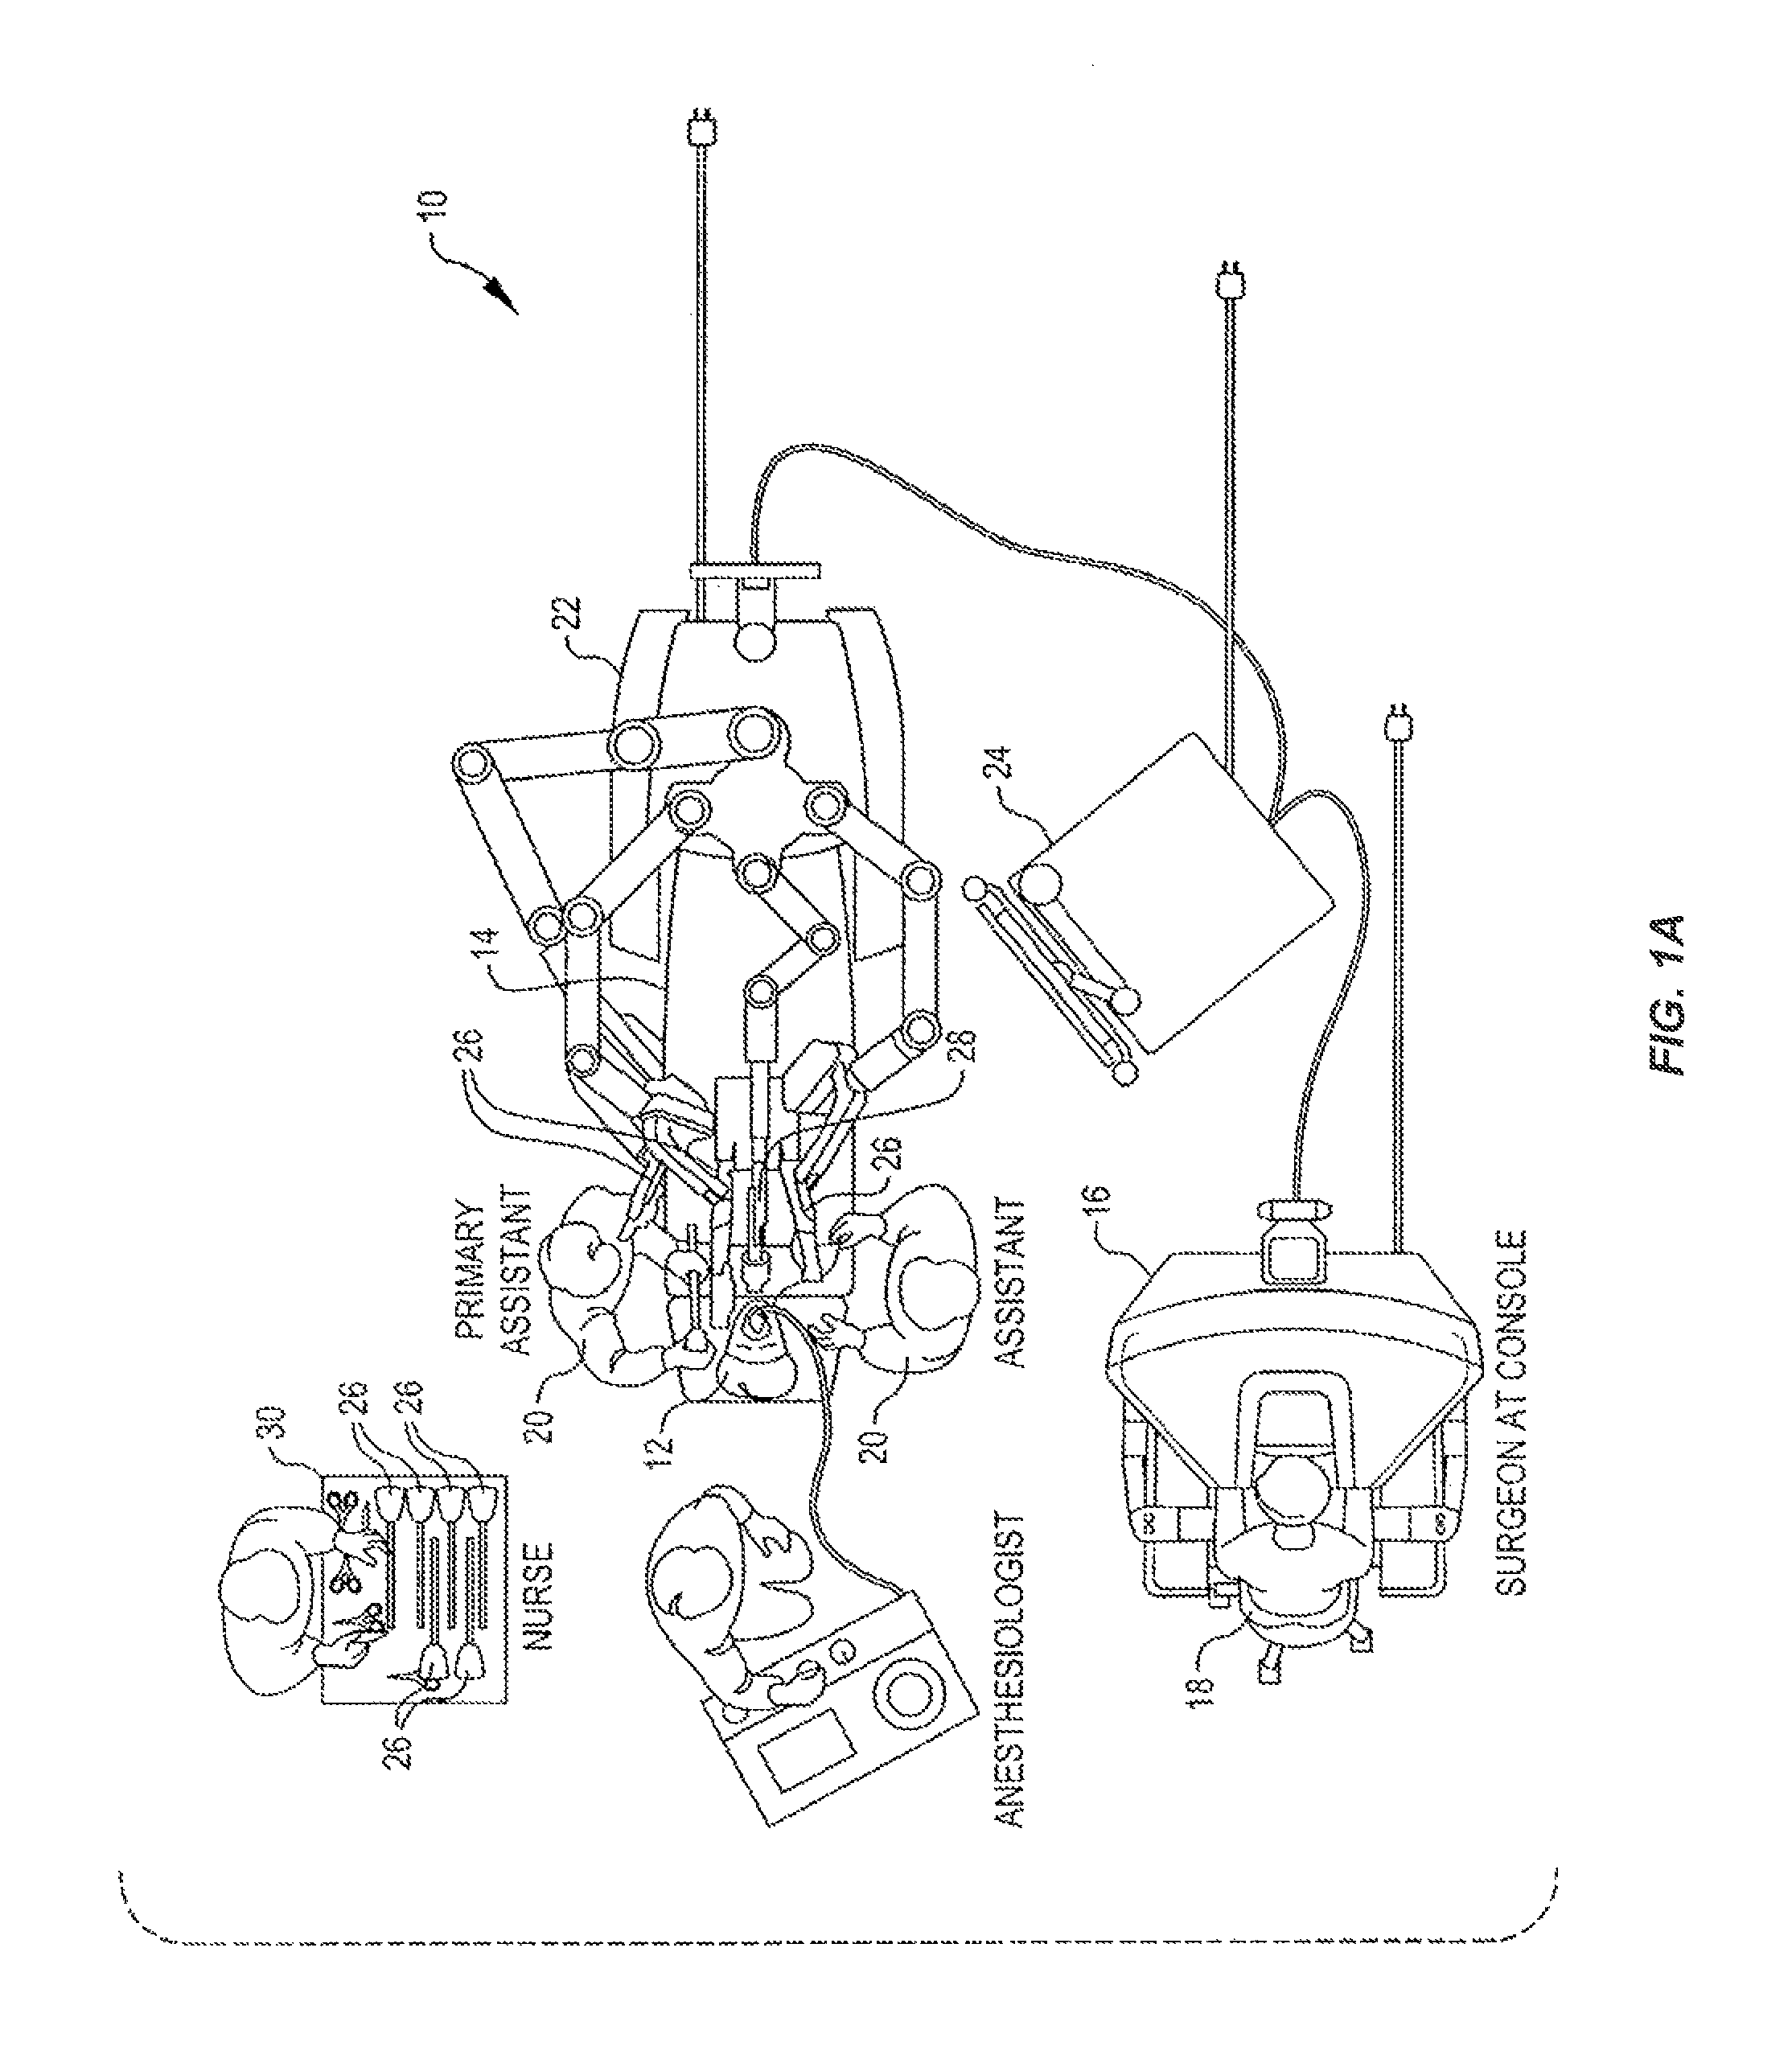 Inter-operative switching of tools in a robotic surgical system